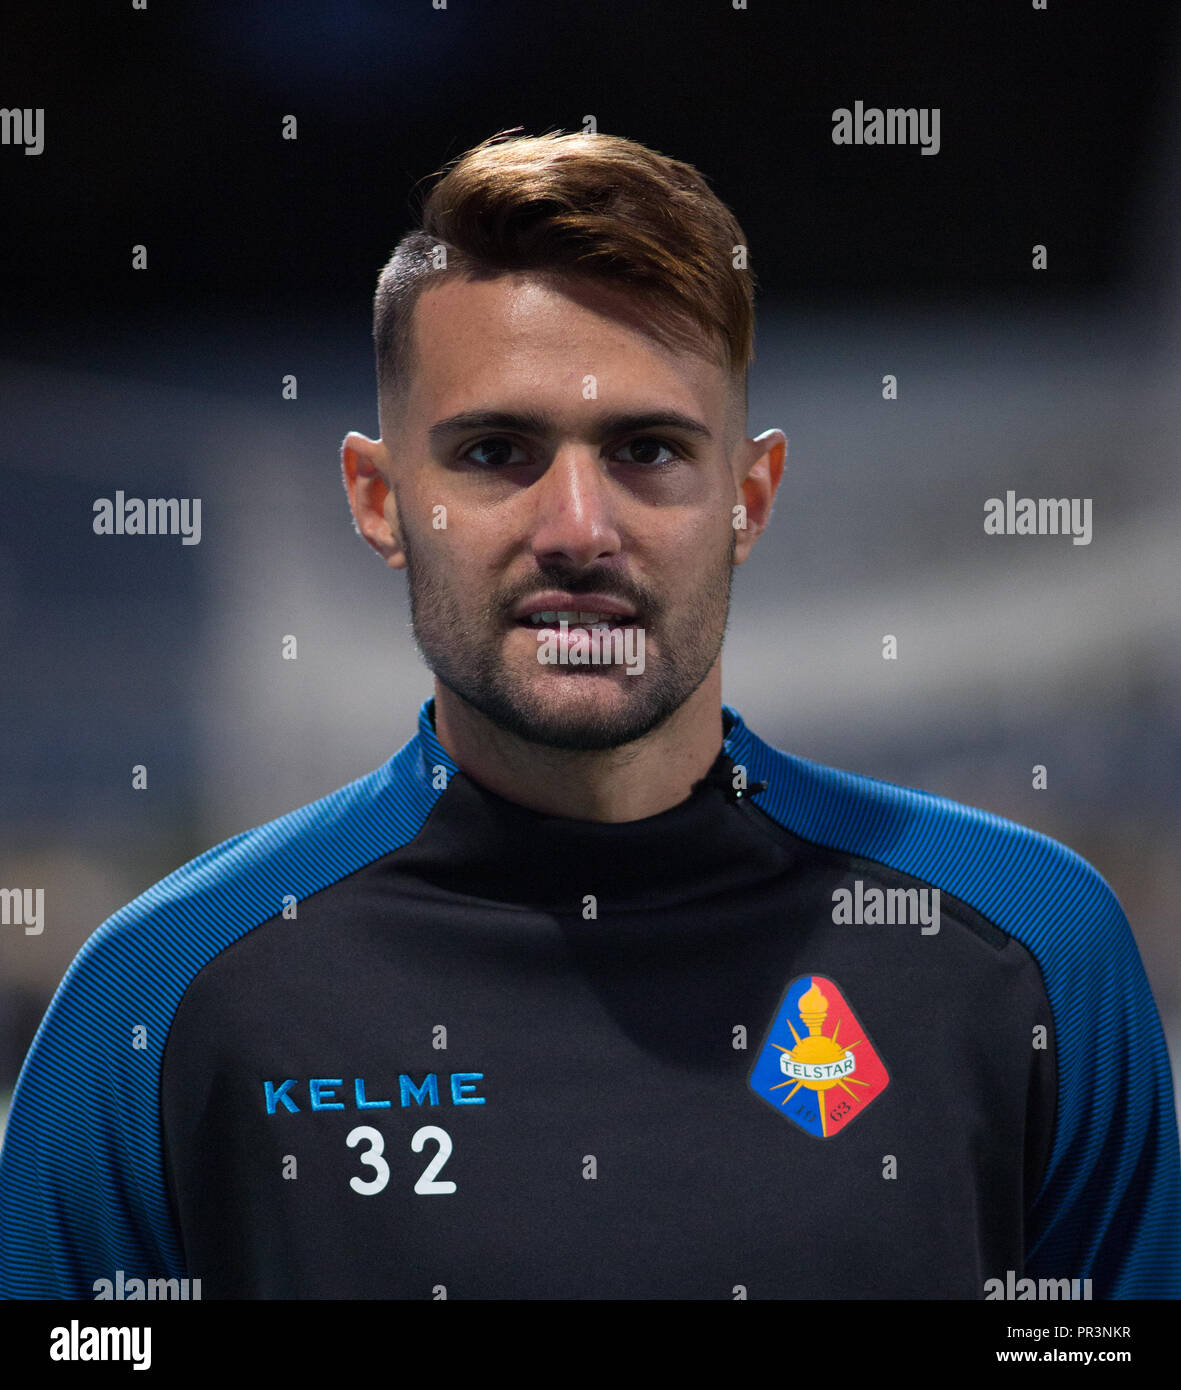 Telstar attacker, Facundo Lescano, looks at camera before the match against TOP Oss for the Dutch second division, in Haarlem, Netherlands, September Stock Photo